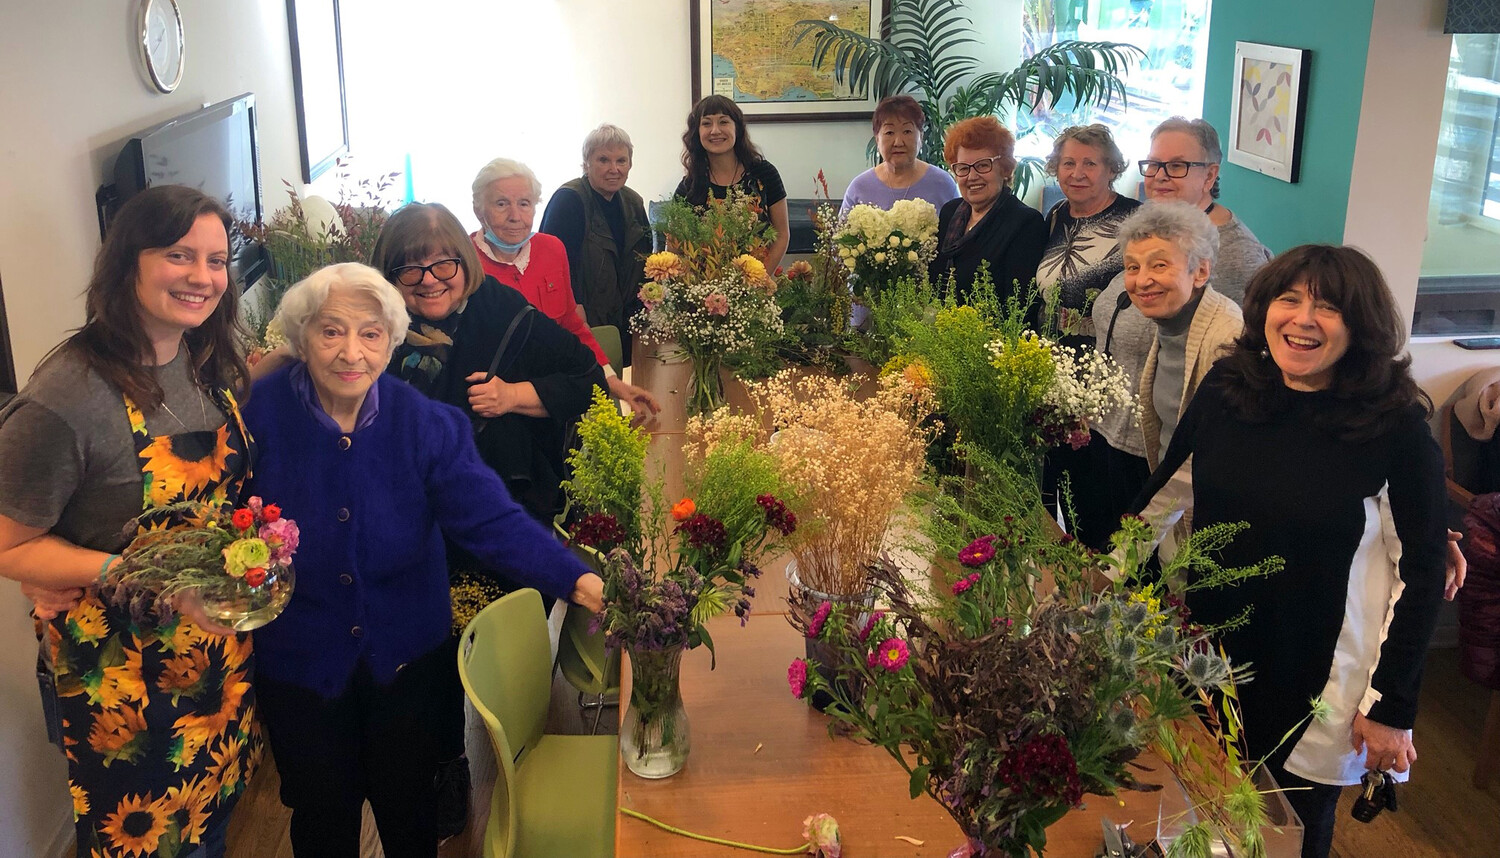 Flower arranging with Senior residents at Hayworth House